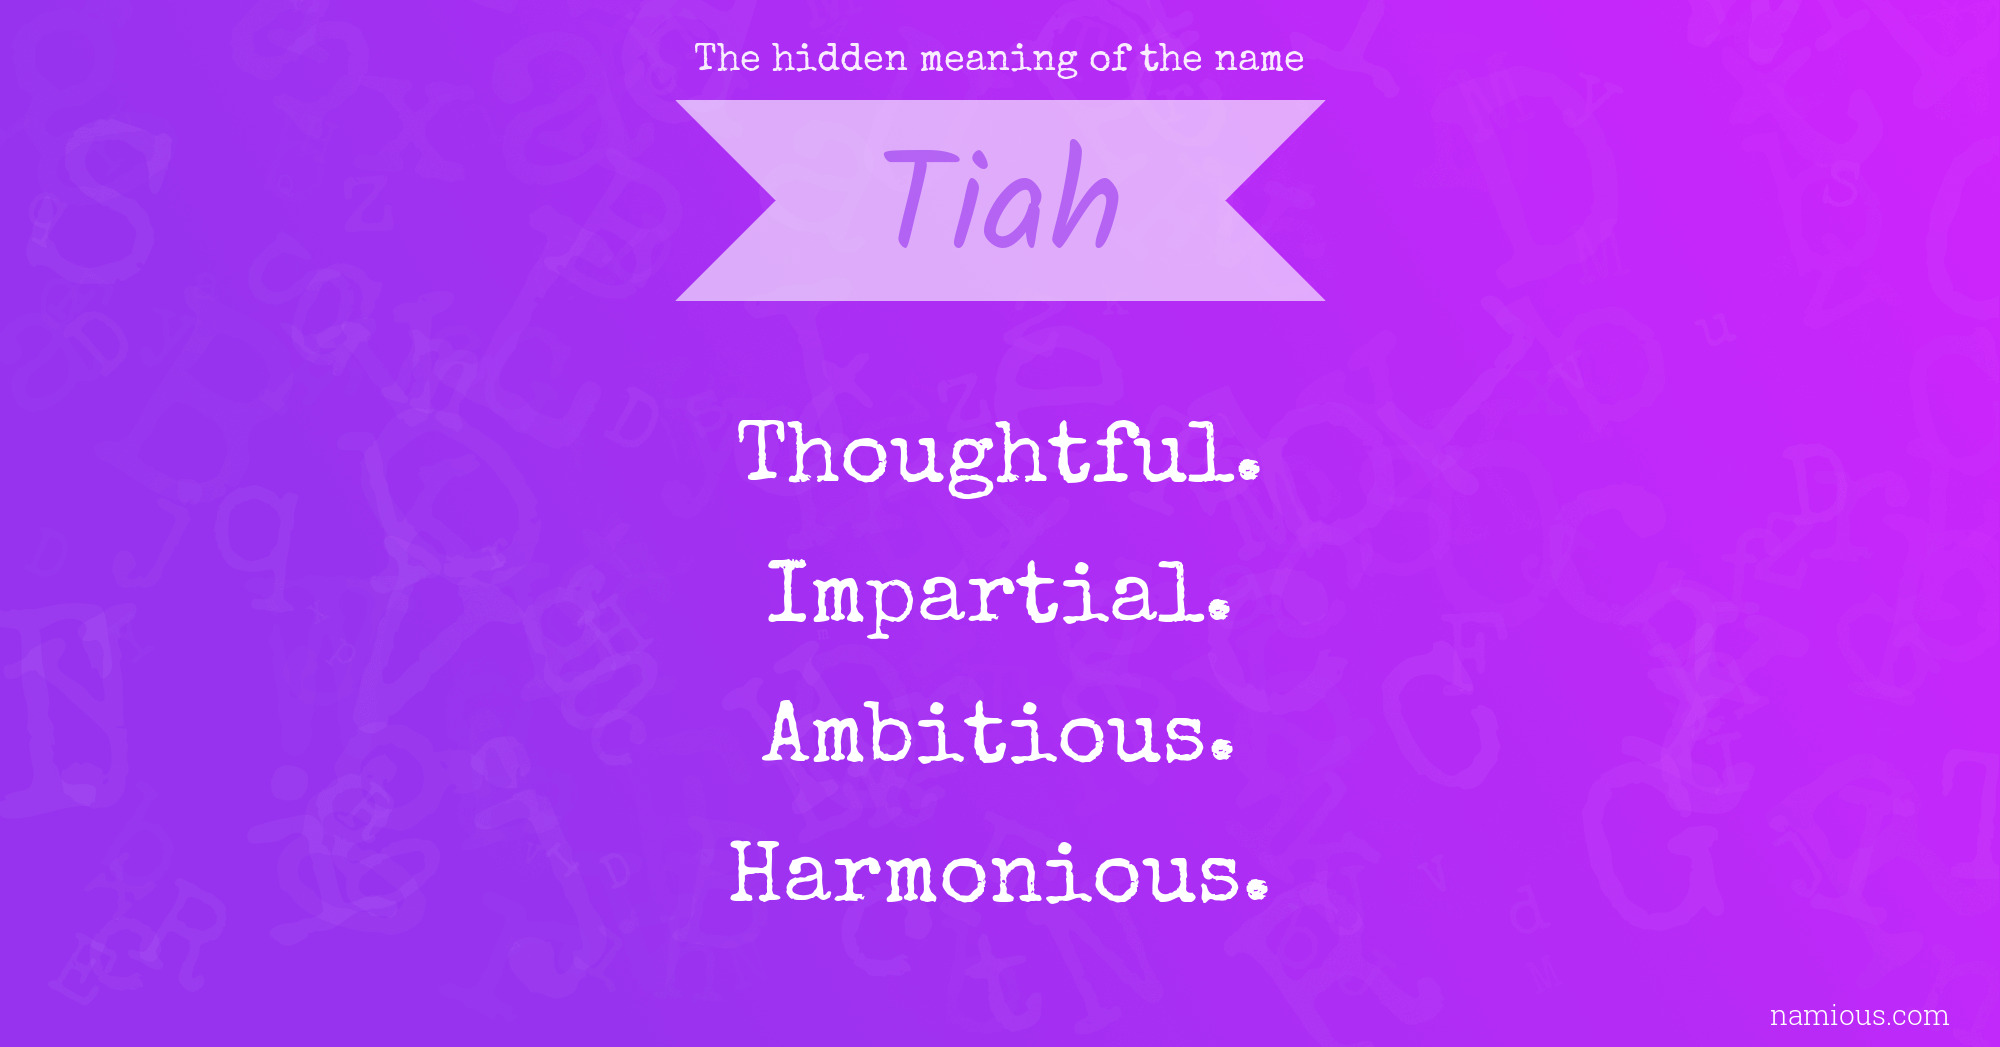 The hidden meaning of the name Tiah